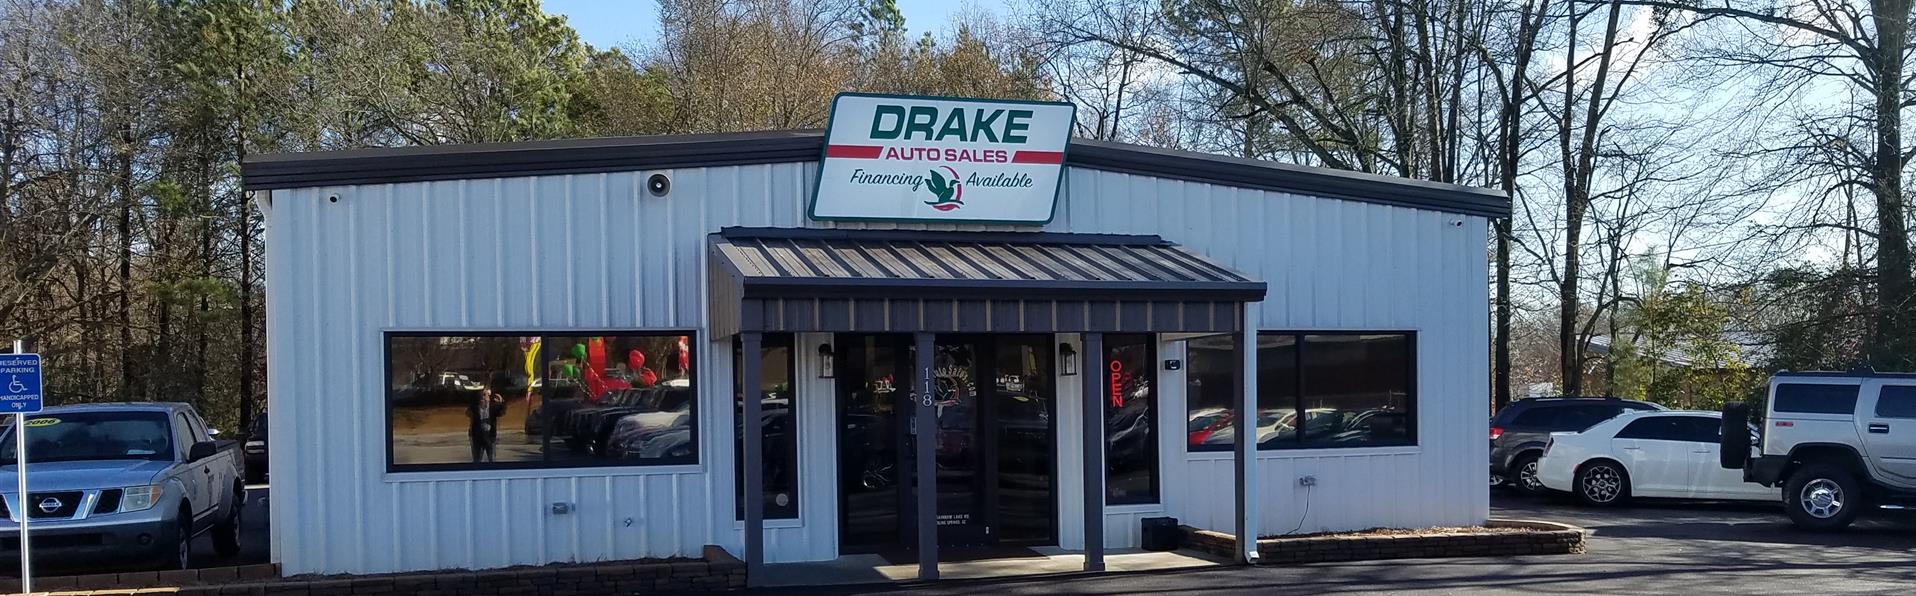 Used Cars Boiling Springs SC | Used Cars & Trucks SC | Drake Auto Sales